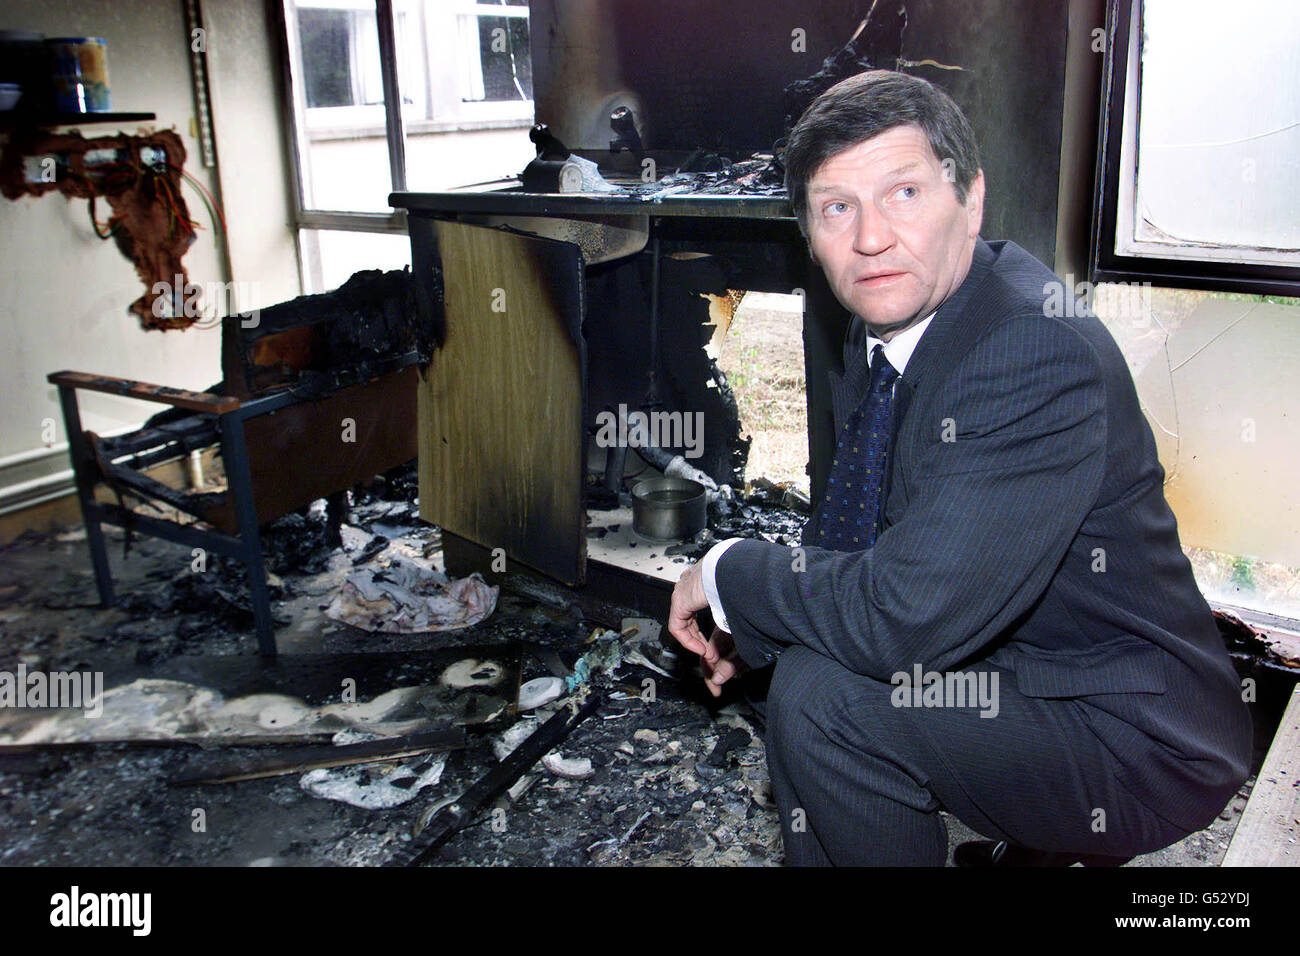 Ulster Unionist Councillor and Mayor of Ballymena James Currie at the scene of the latest arson attack in Ballymena. Mr Currie visited Saint Patrick's Catholic School on the town's Broughshane road which was attacked. * The fire was contained to a staff room but a number of classrooms suffered smoke damage. A Catholic church in Harryville escaped serious damage after a fire also burned it self out. Stock Photo